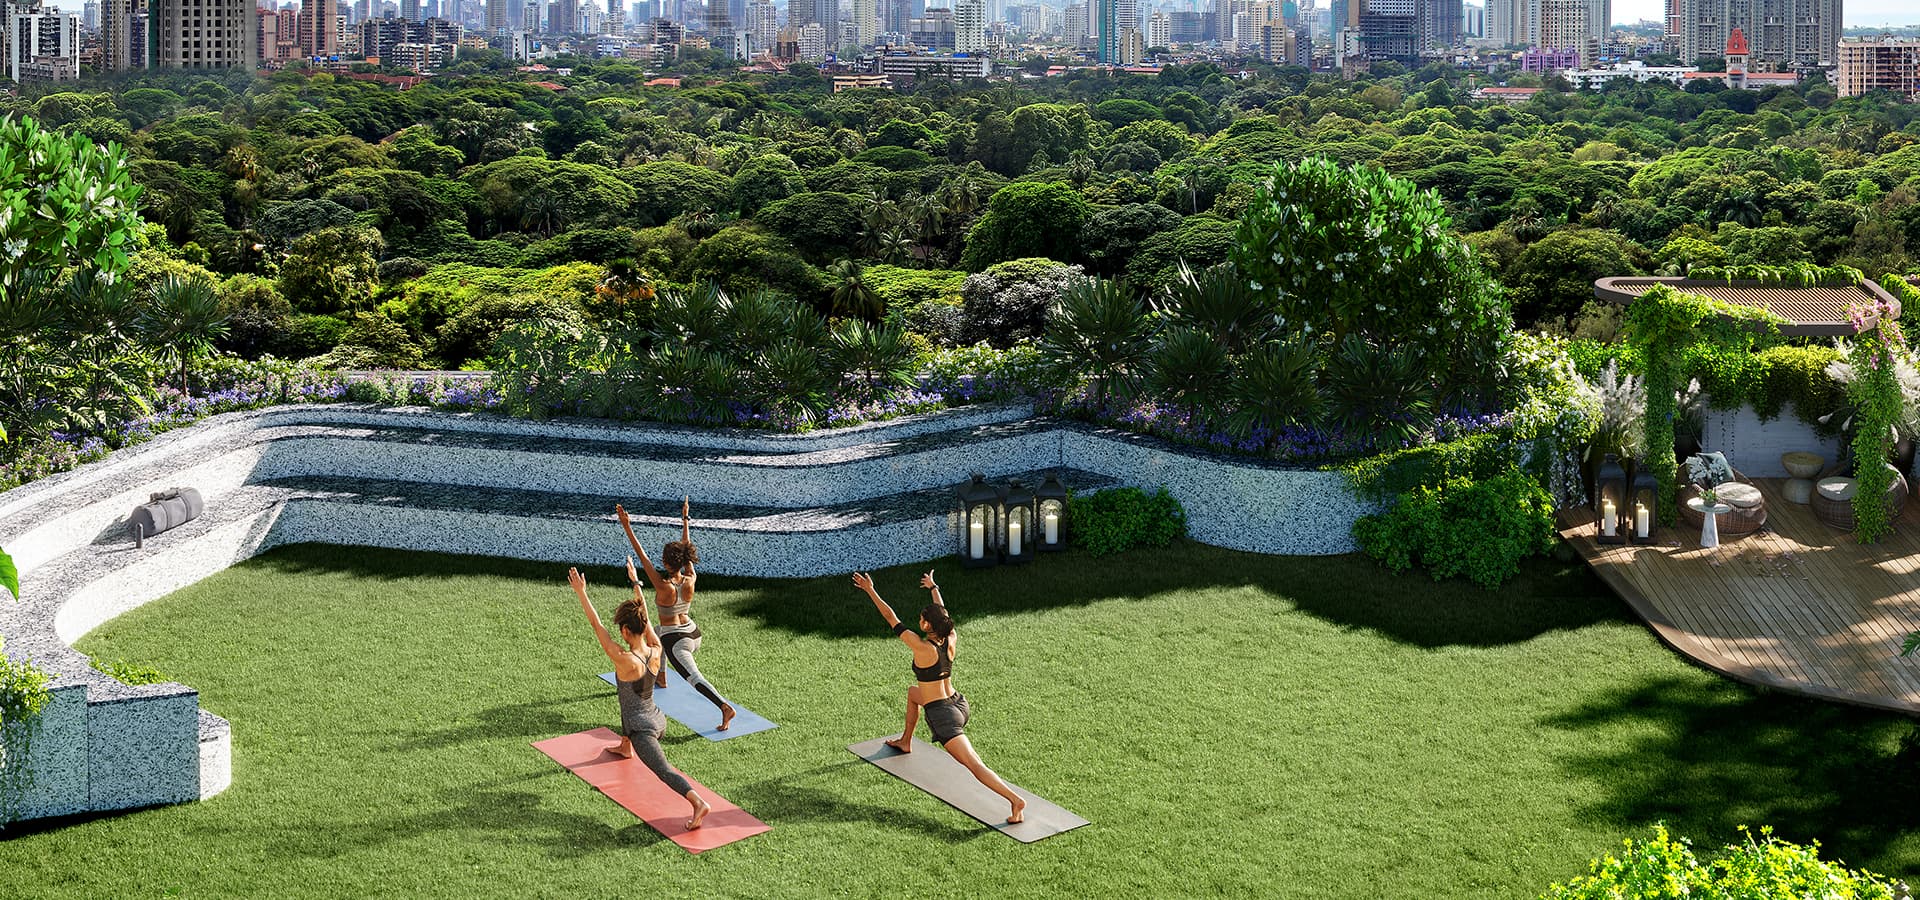 Piramal Realty's luxury apartments offer amenities like yoga, and enhancing lifestyle in Mumbai.